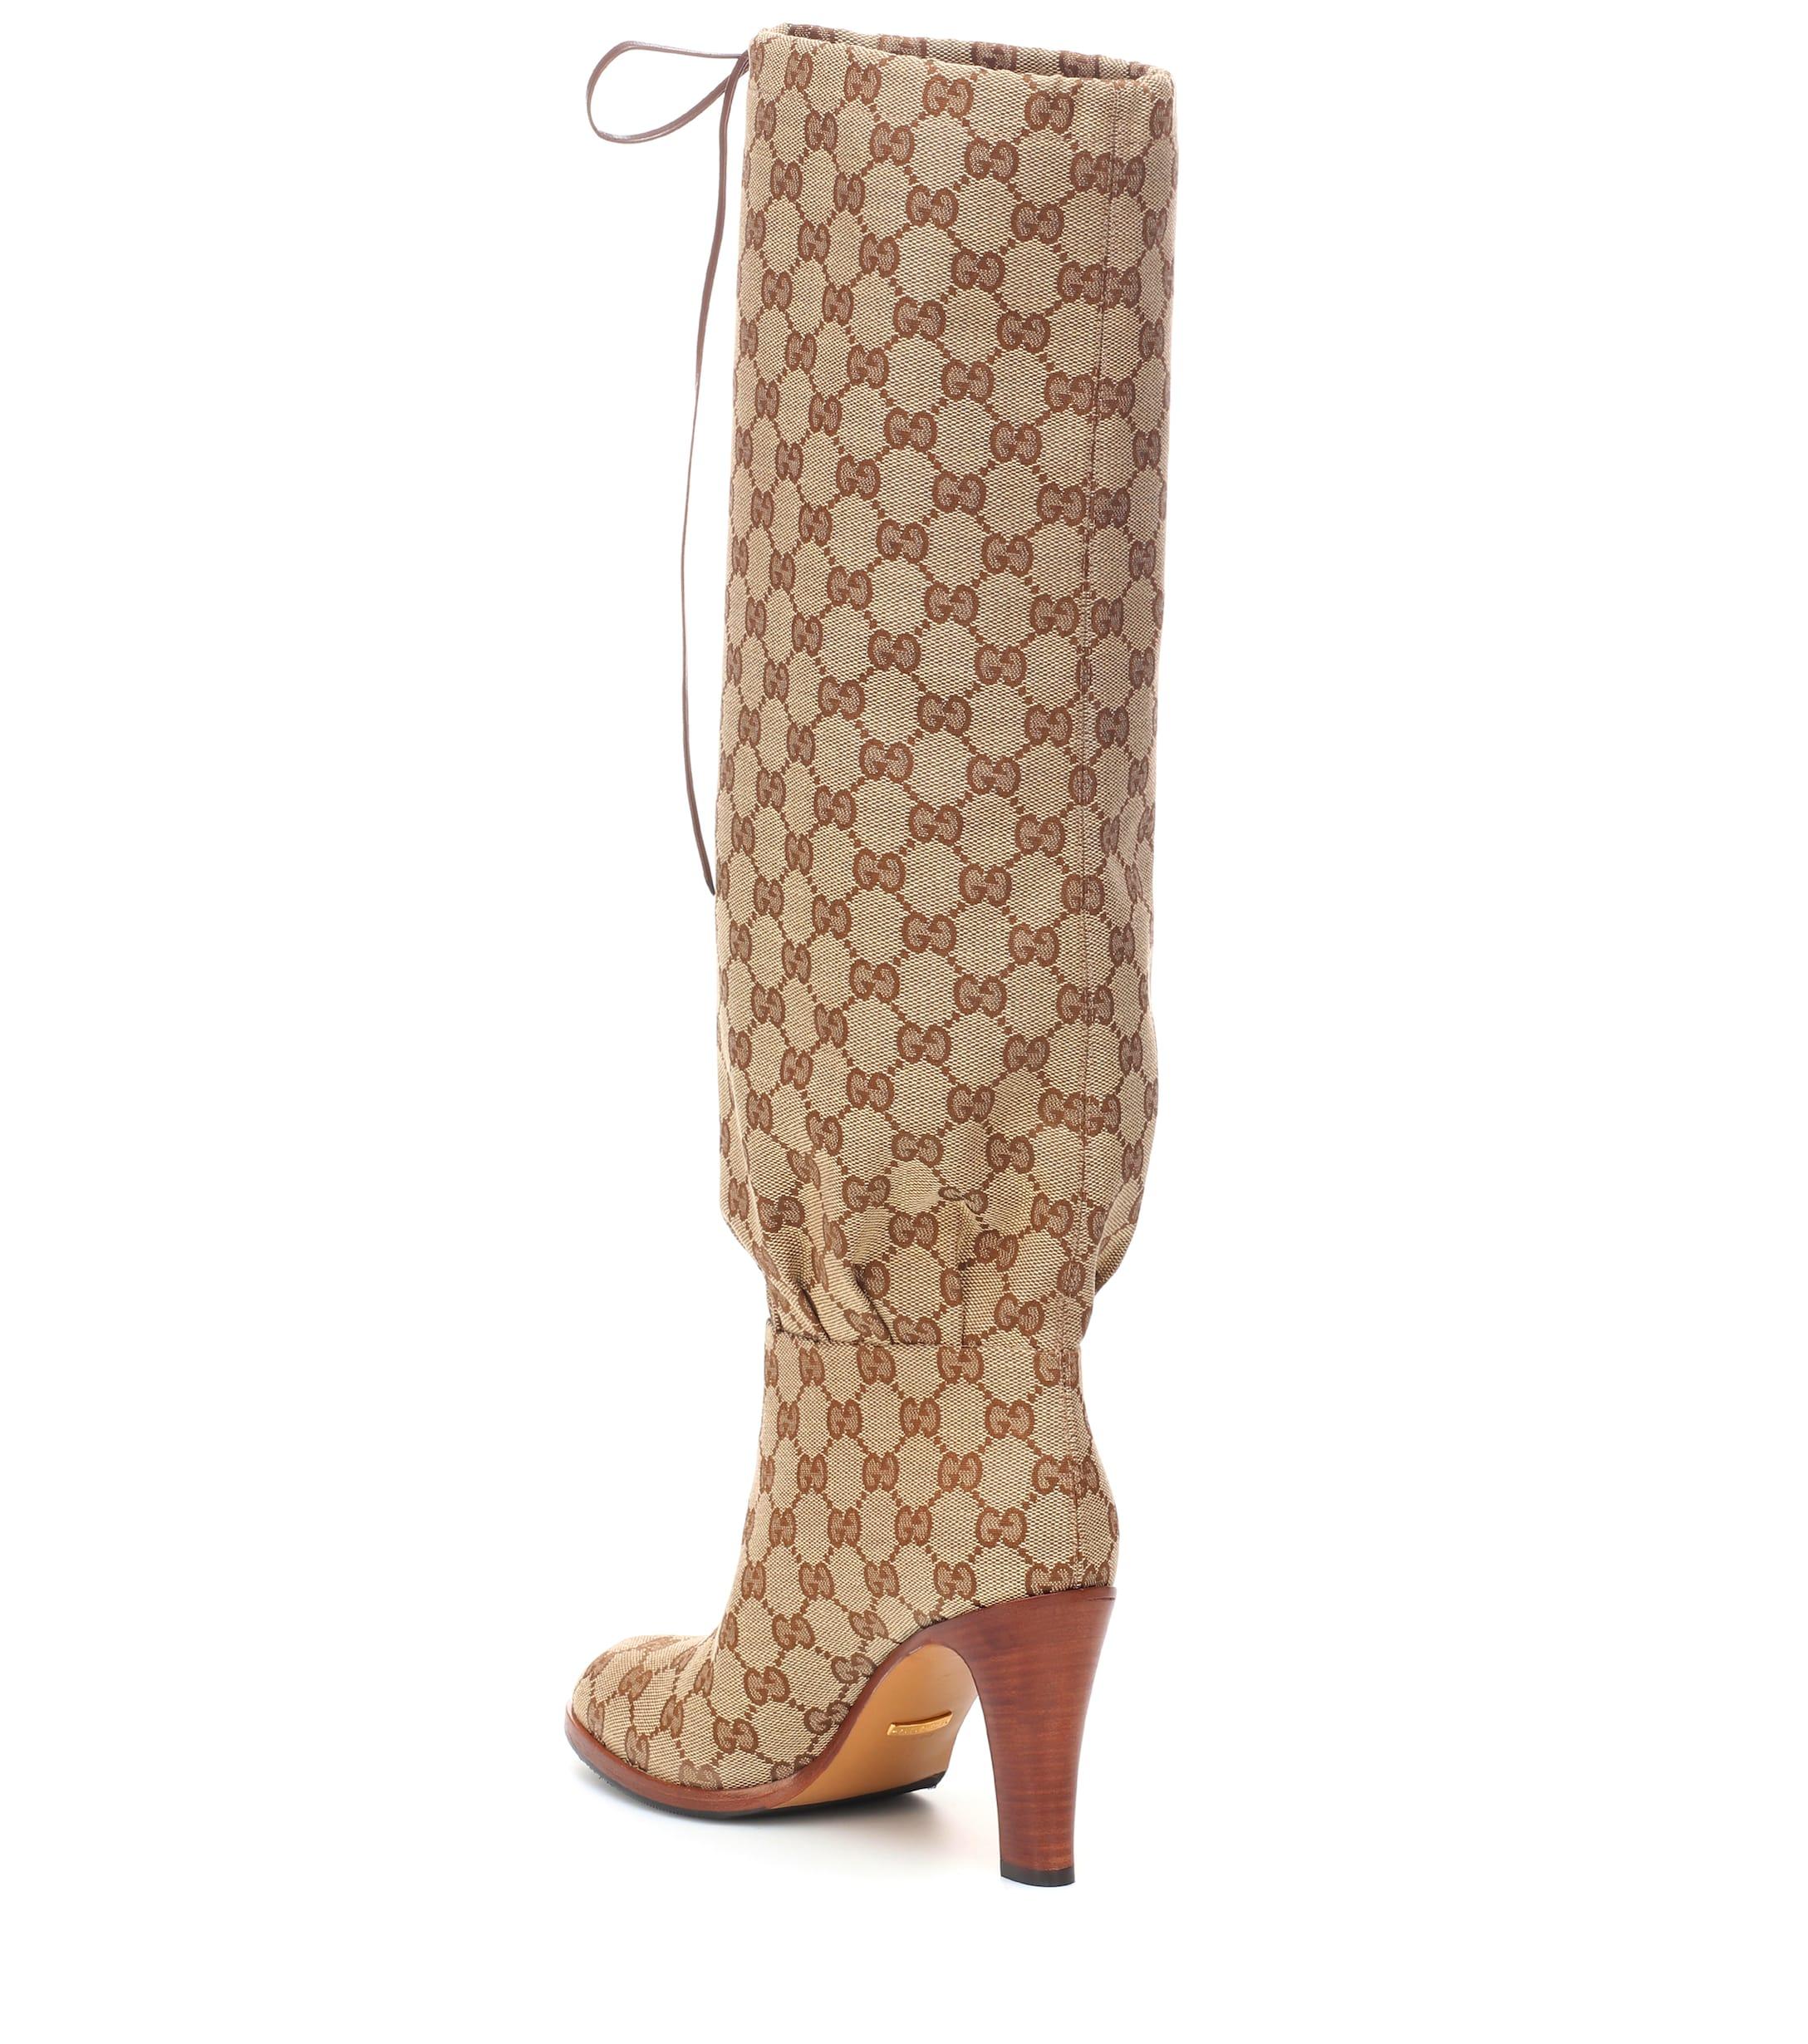 Gucci GG Canvas Knee-high Boots in Beige (Natural) - Lyst